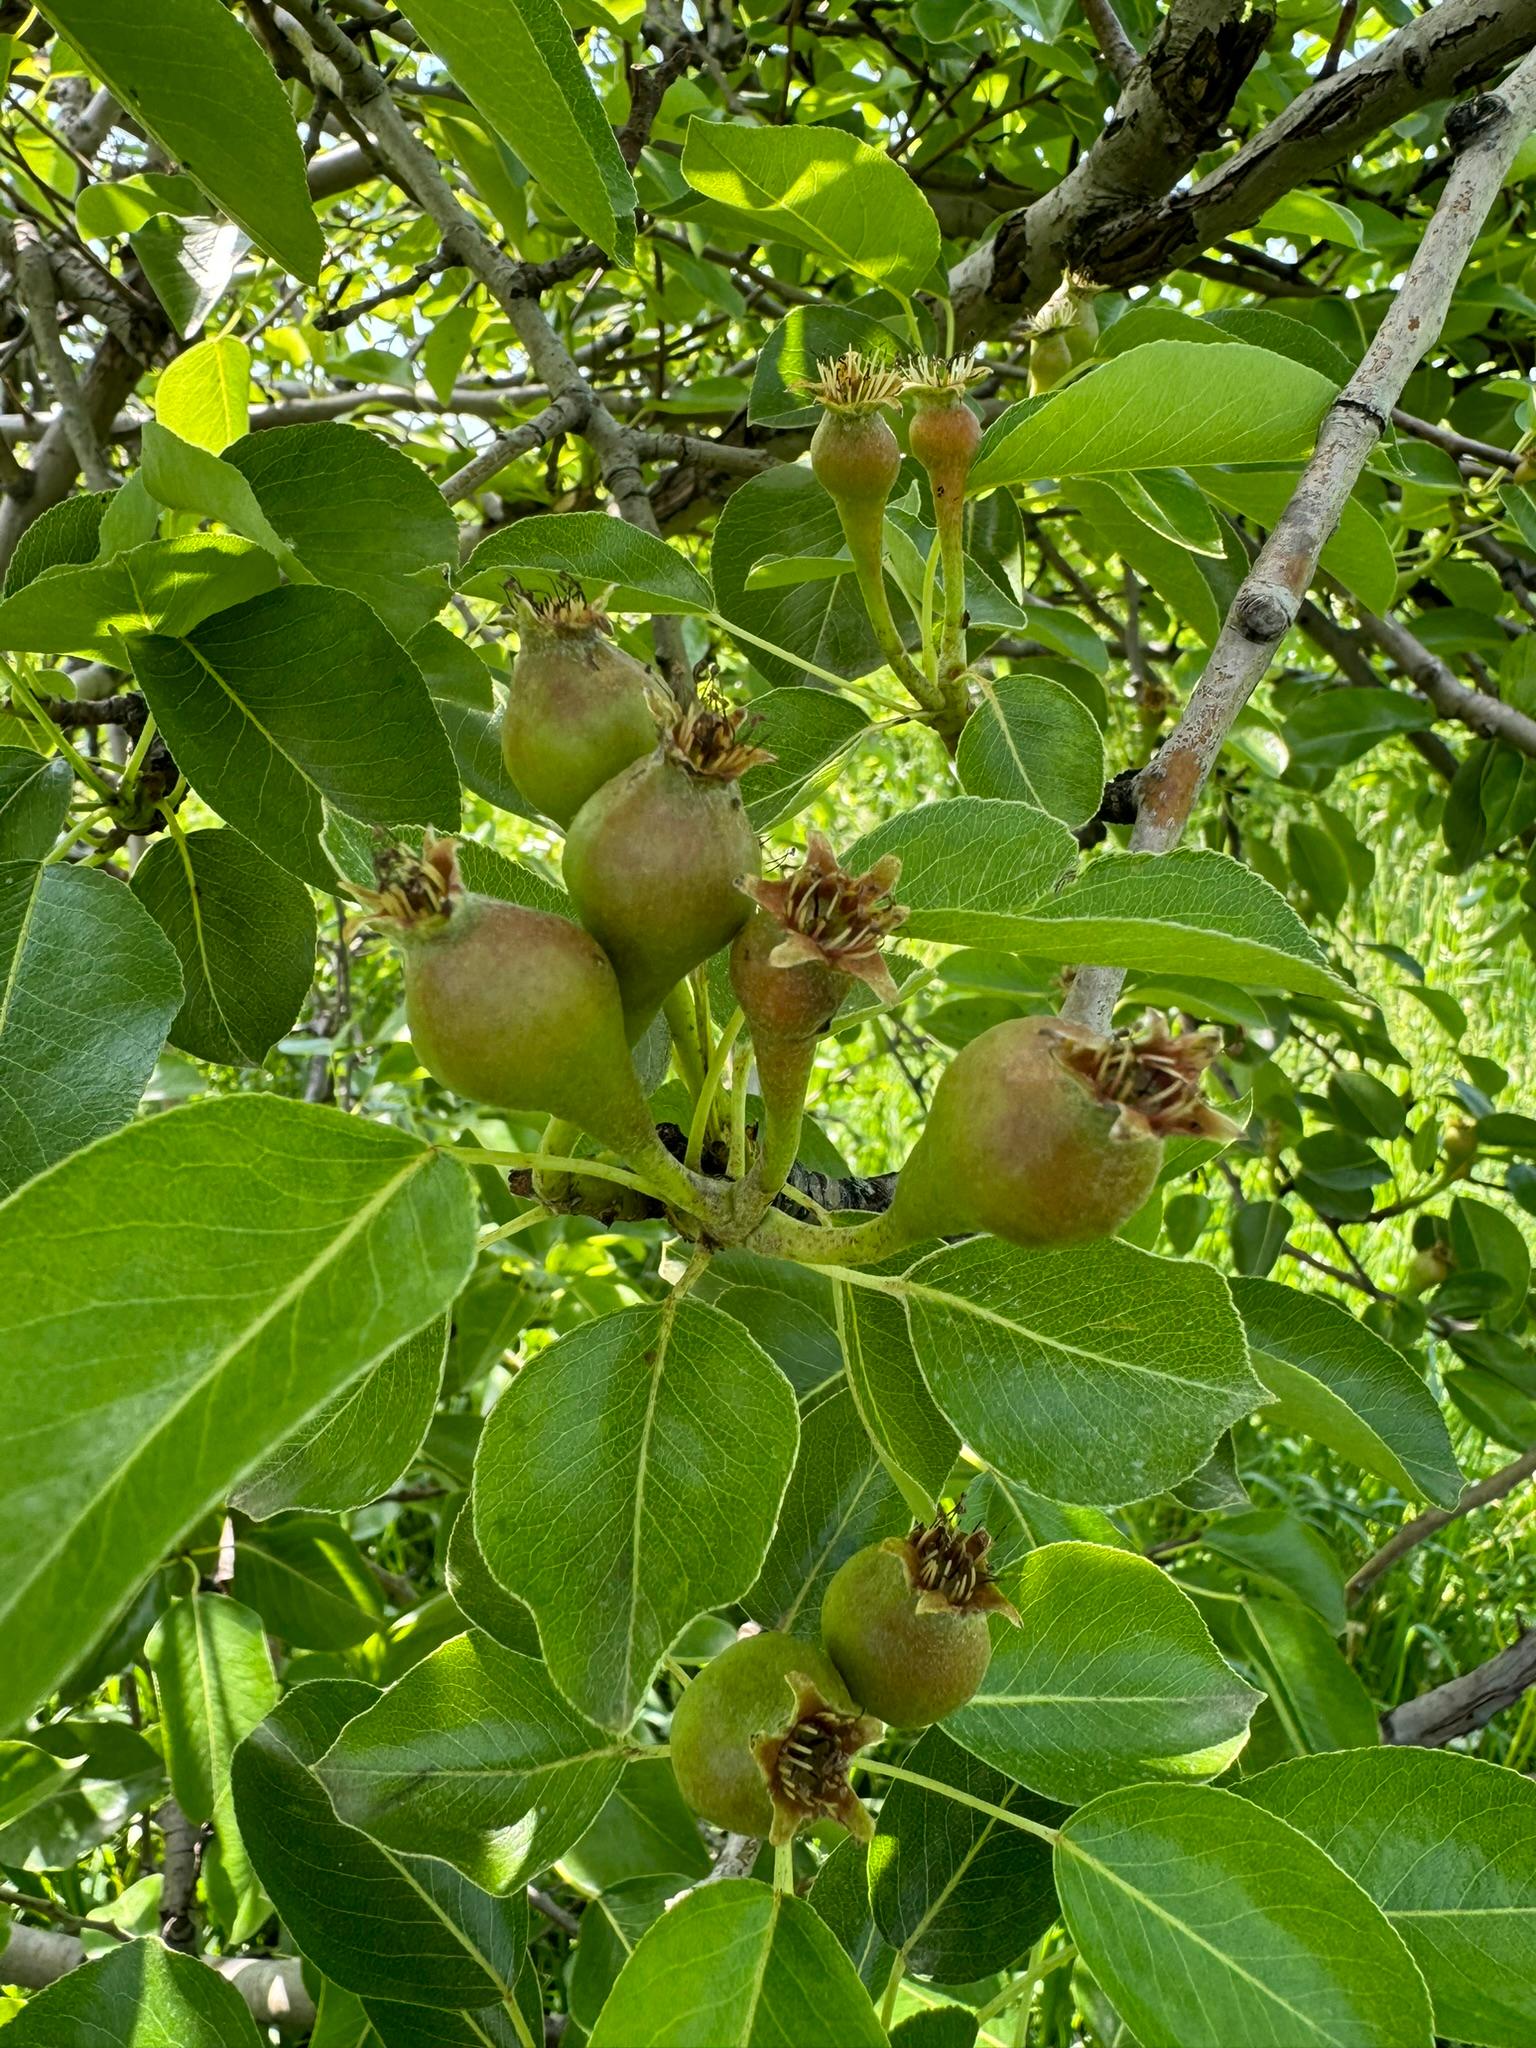 Pears hanging from a tree.